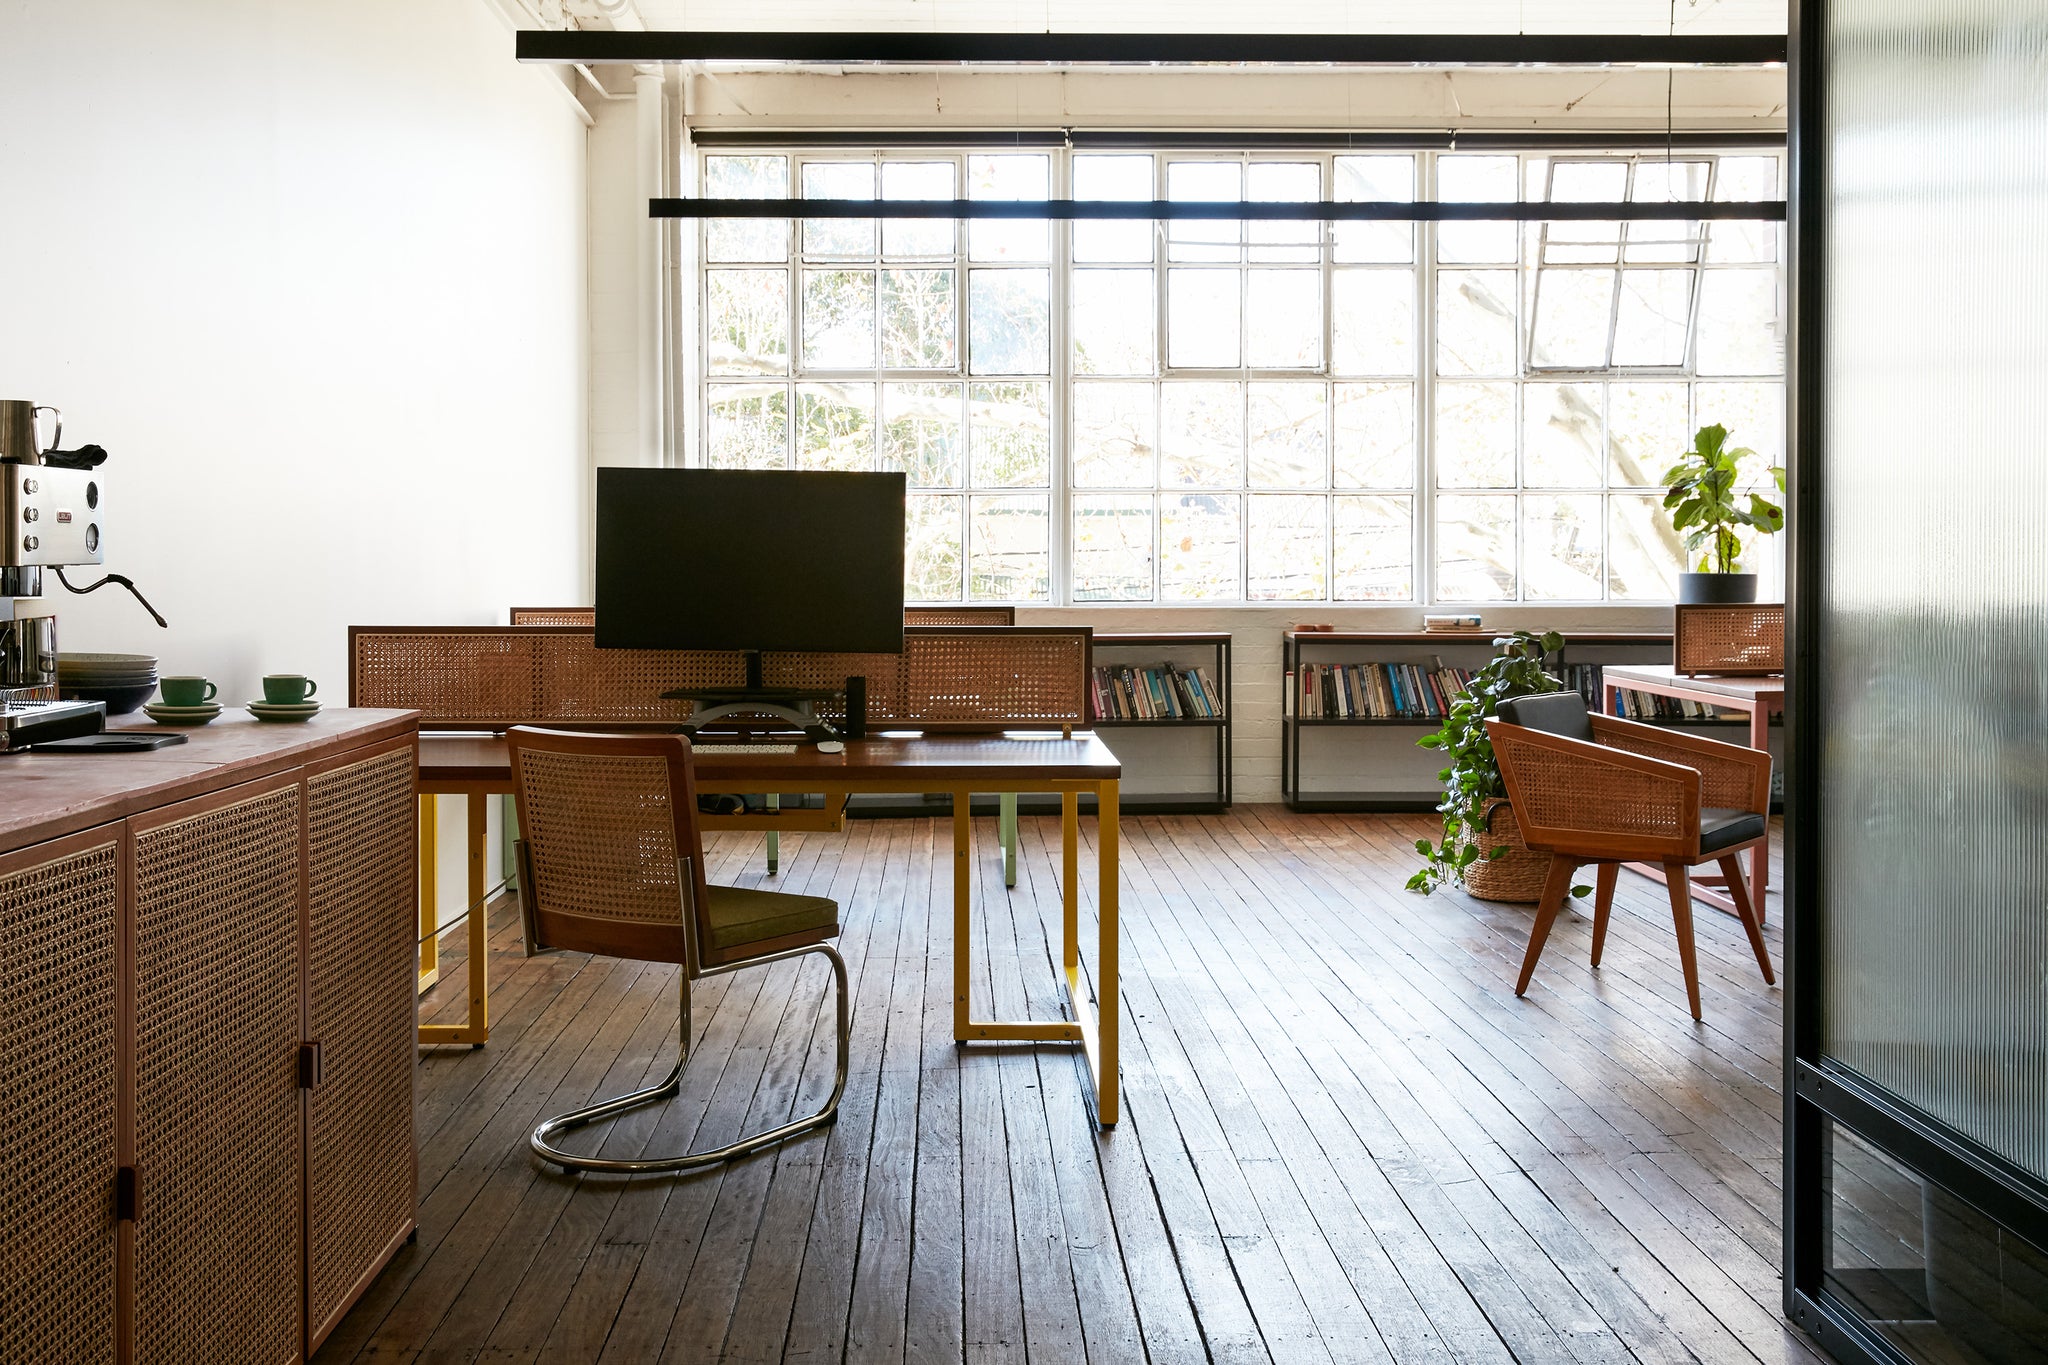 A New York loft-style office in Surry Hills